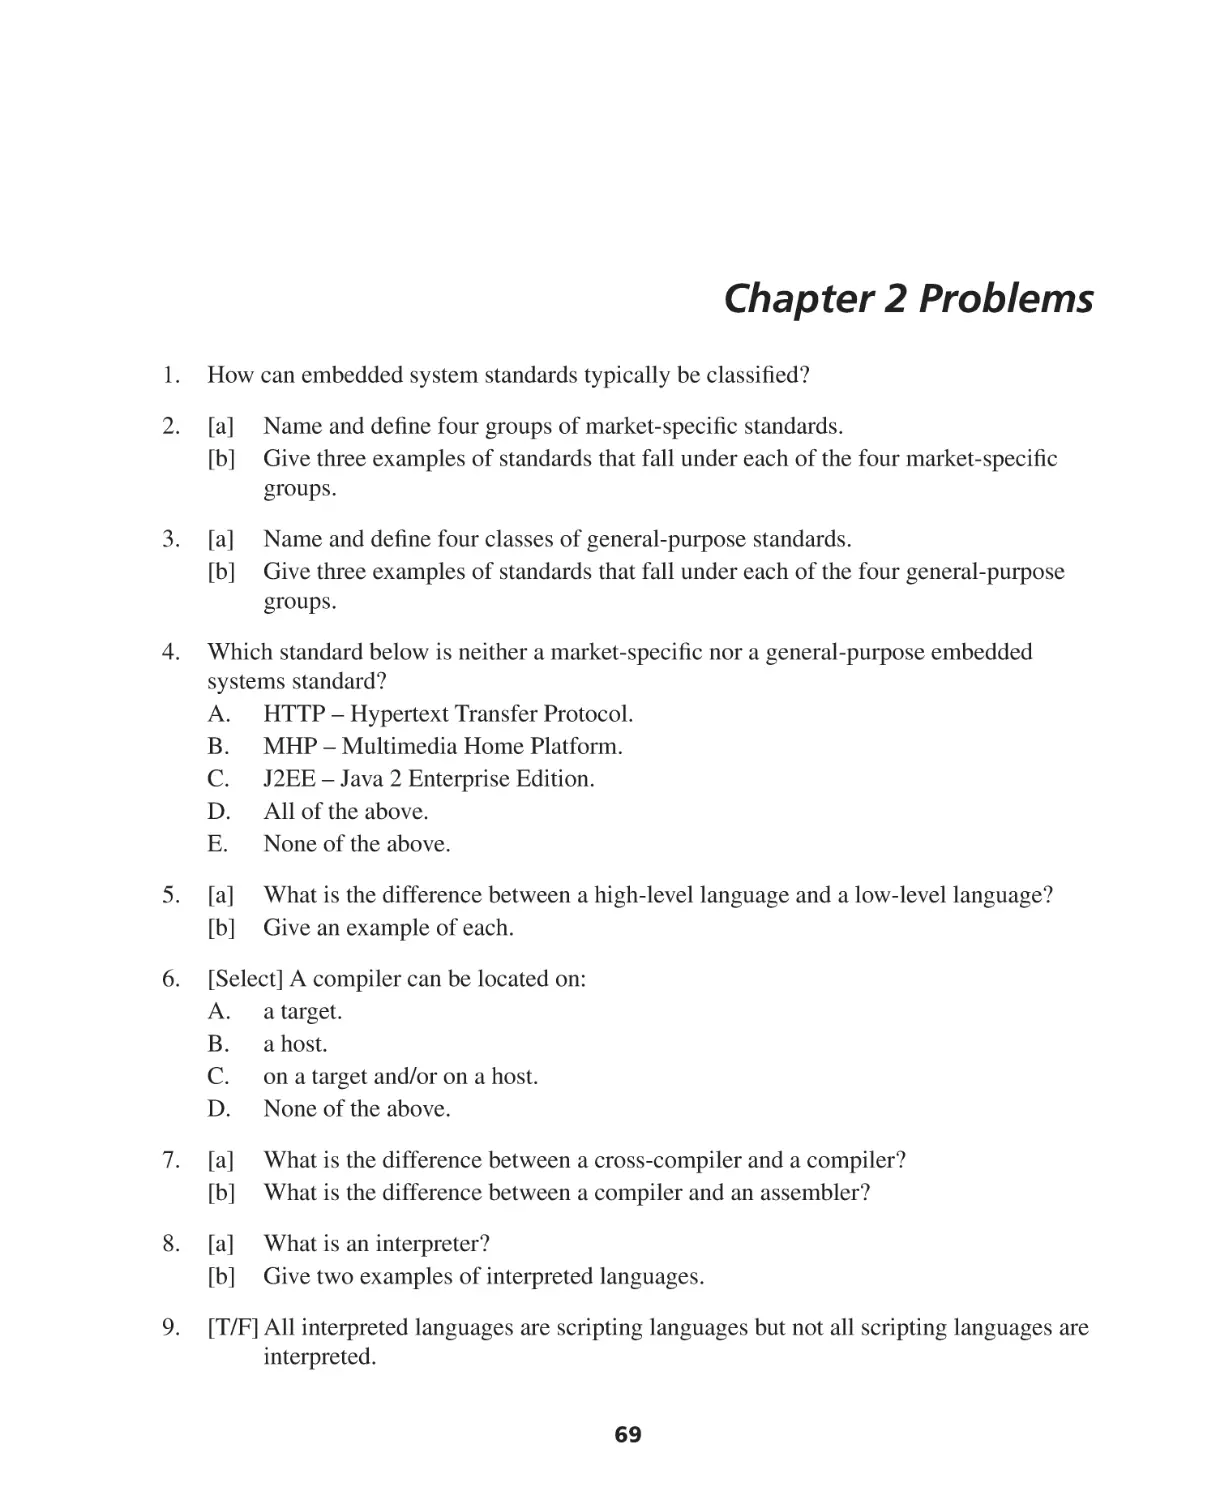 Chapter 2 Problems